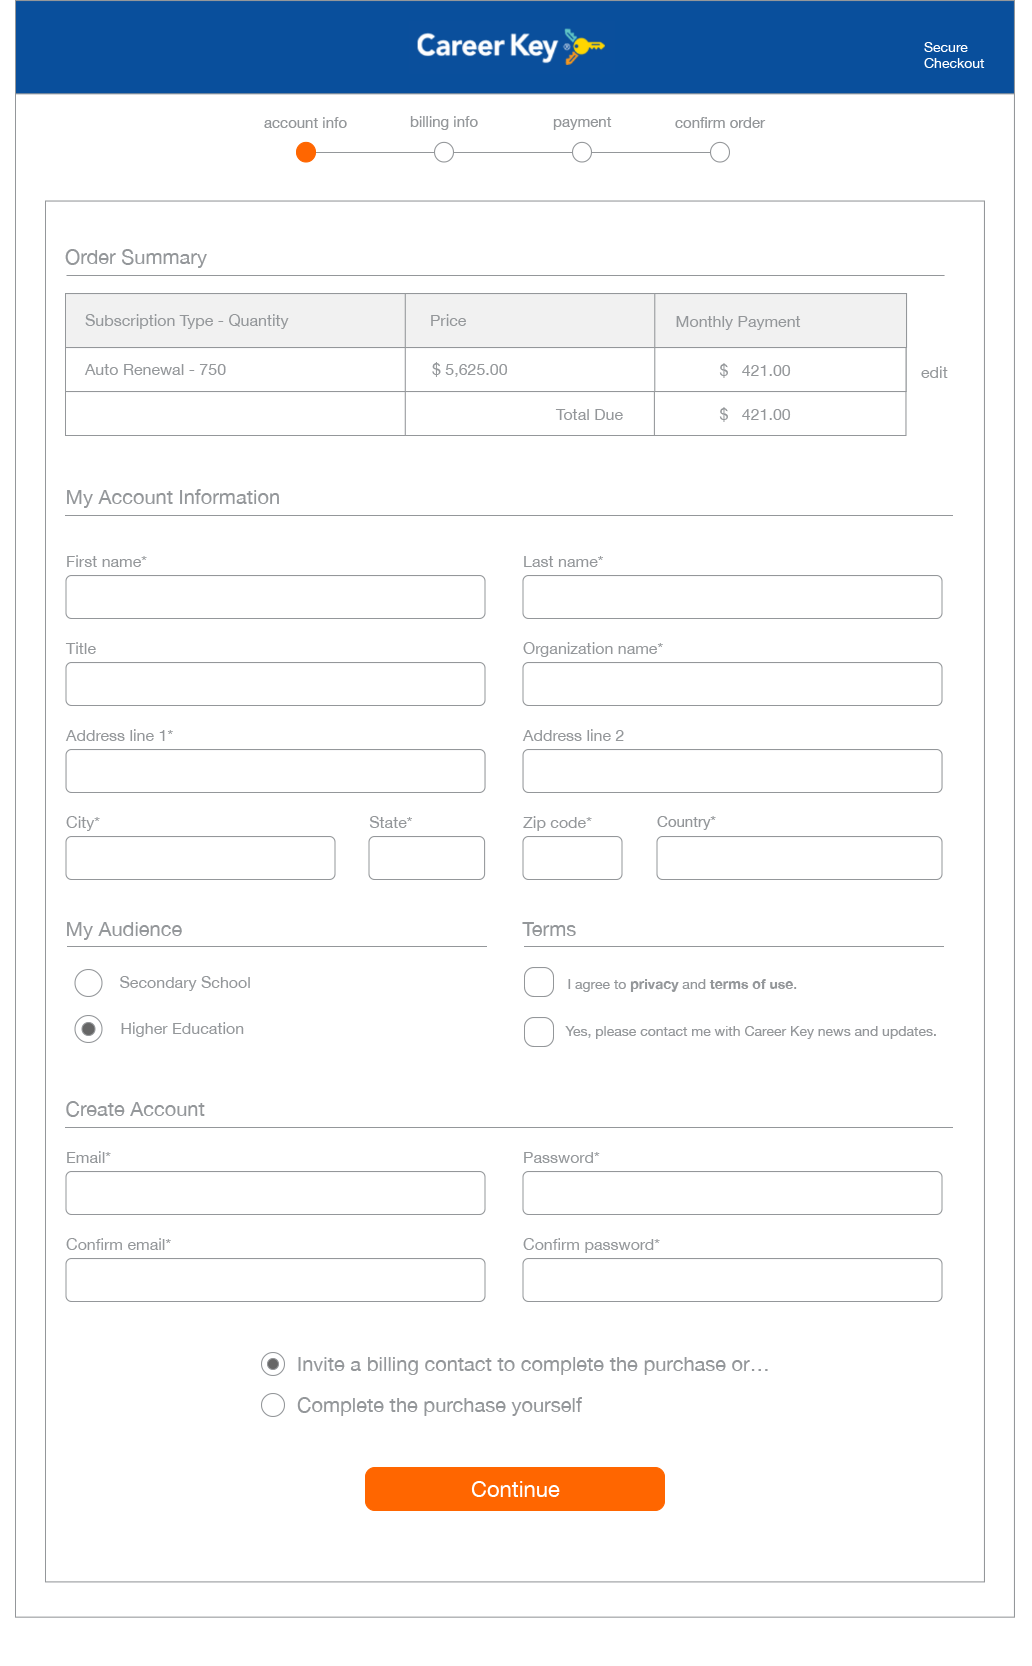 payment process wireframe 01 - account info